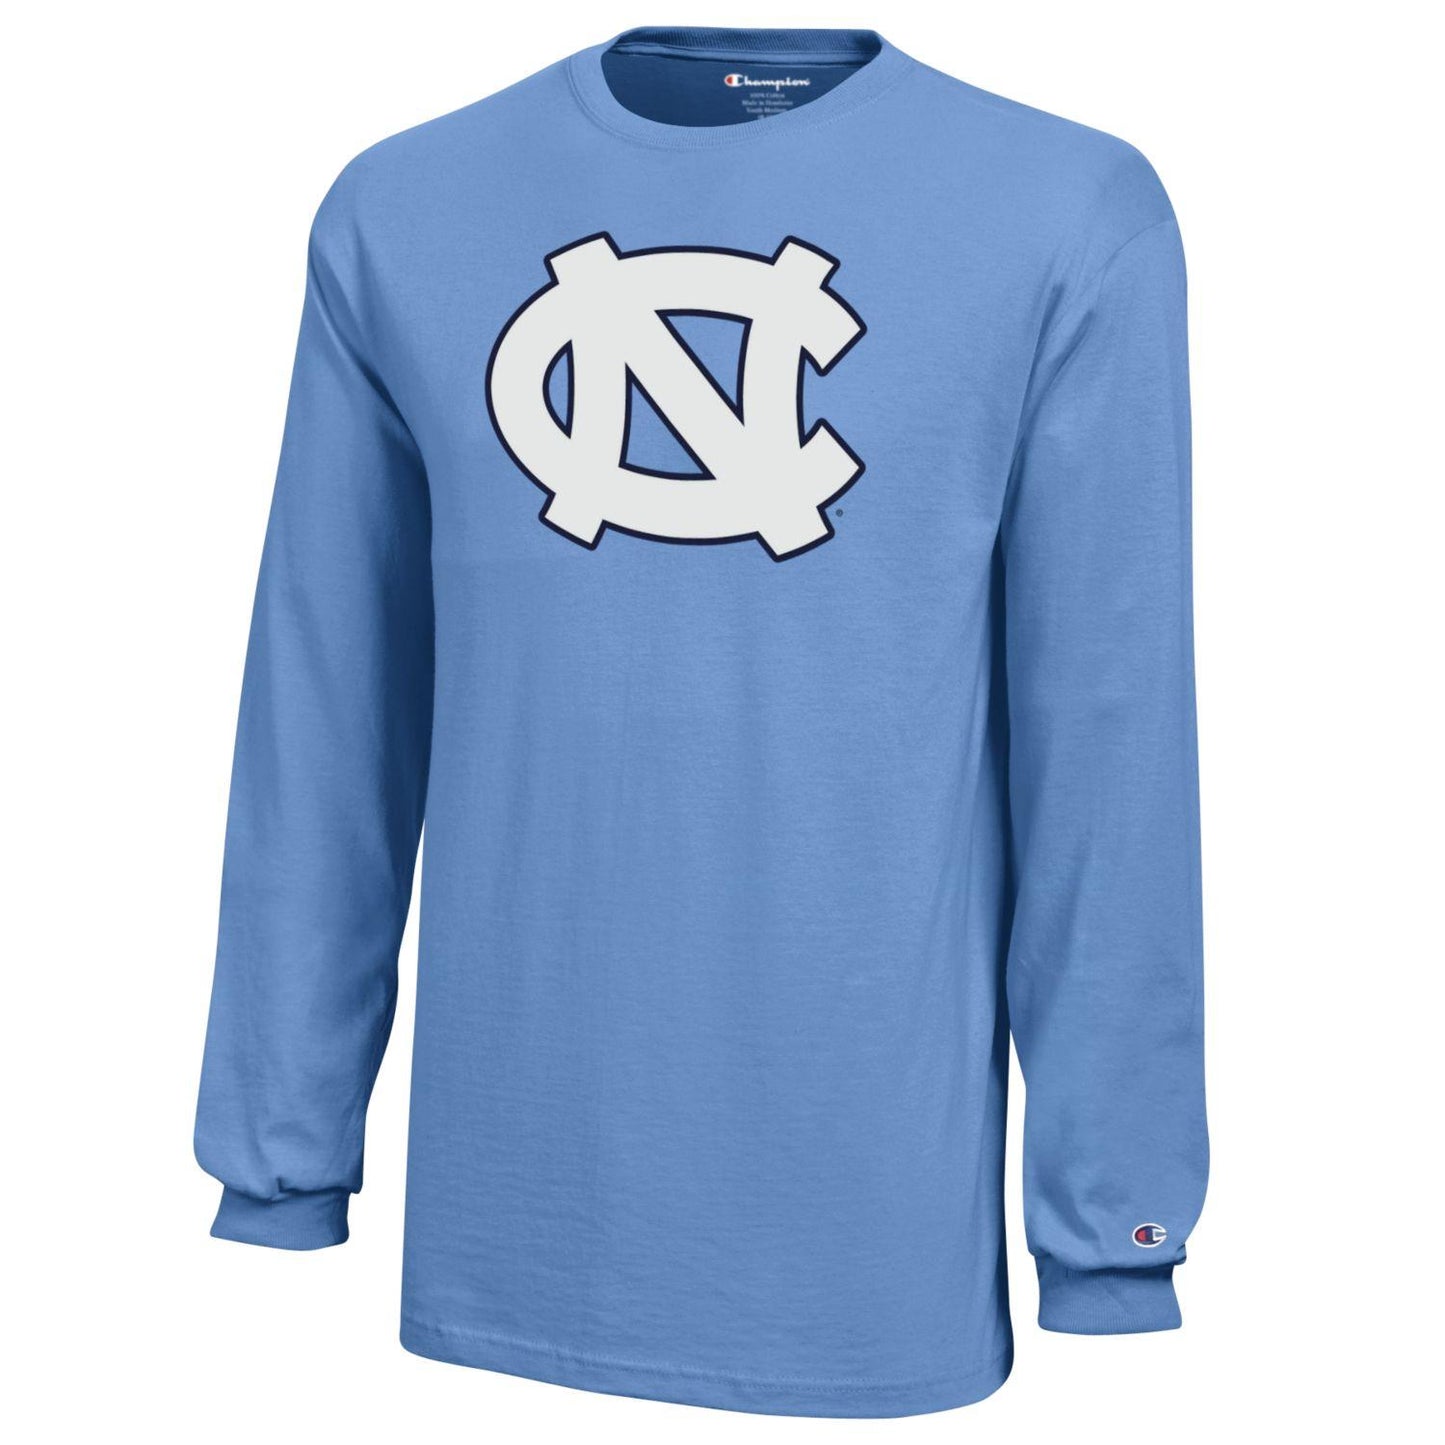 Kid's UNC Game Day Long Sleeve  by Champion